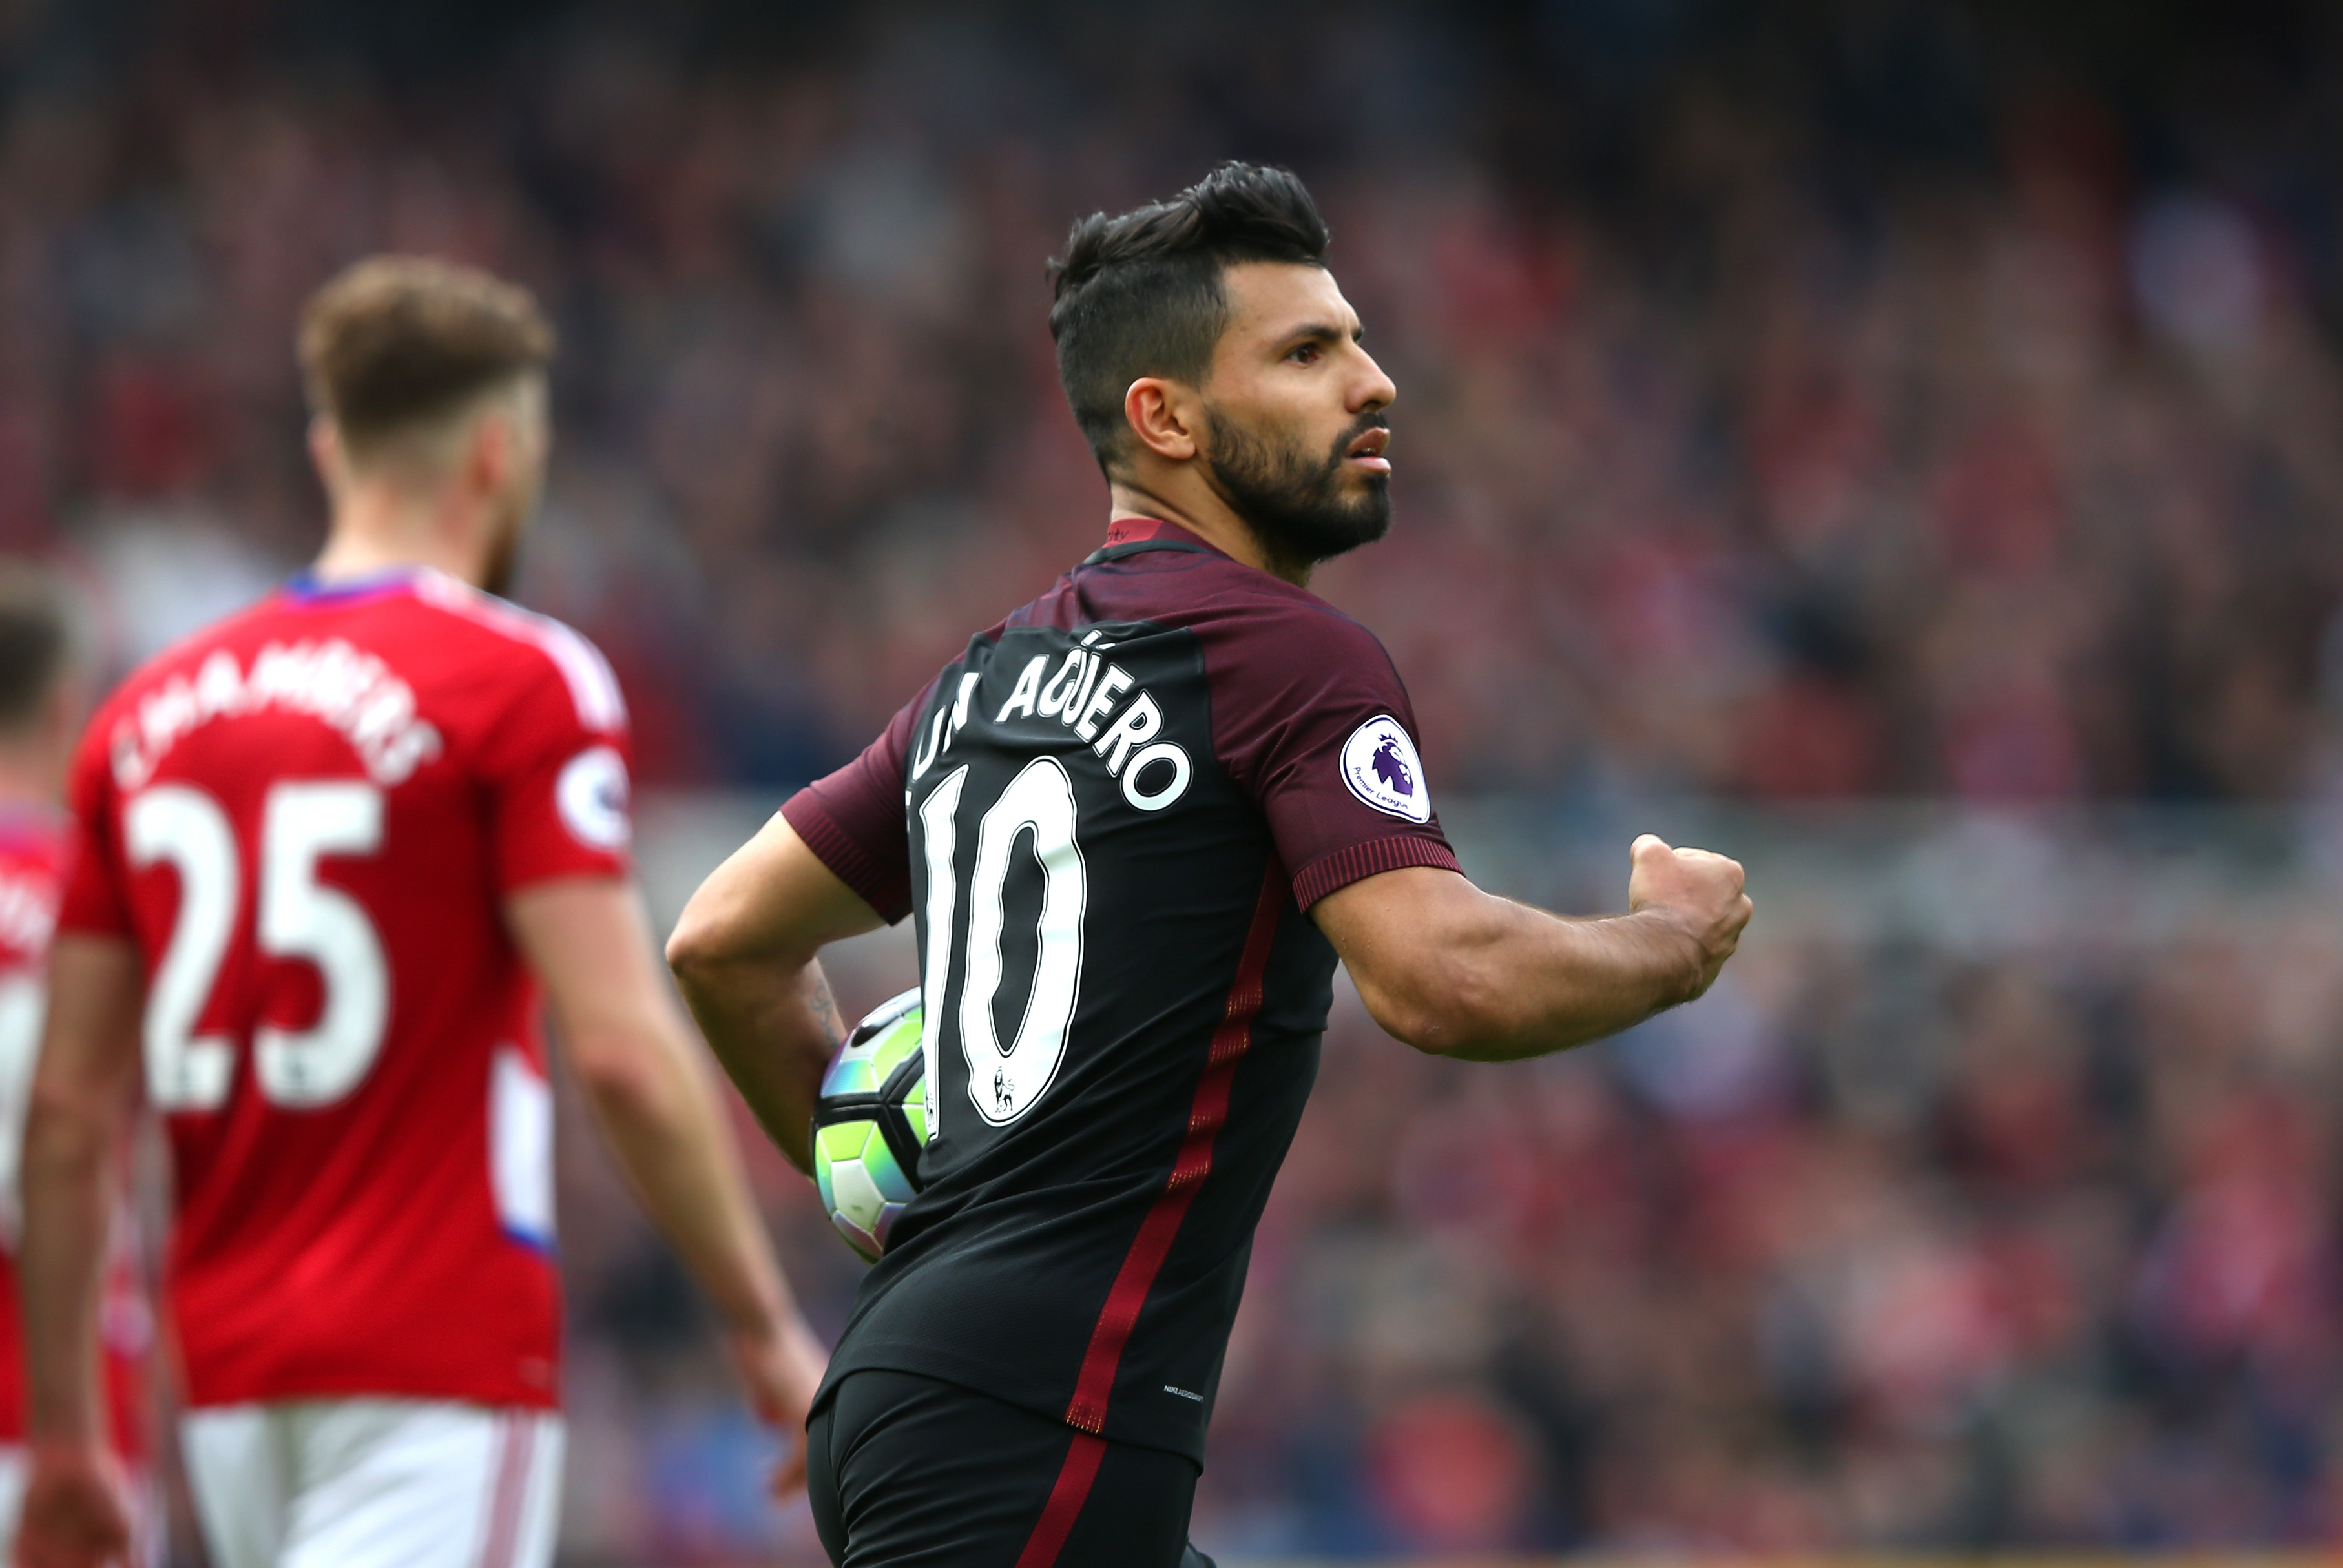 MIDDLESBROUGH, ENGLAND - APRIL 30: Sergio Aguero of Manchester City celebrates scoring his sides first goal during the Premier League match between Middlesbrough and Manchester City at the Riverside Stadium on April 30, 2017 in Middlesbrough, England.  (Photo by Alex Livesey/Getty Images)